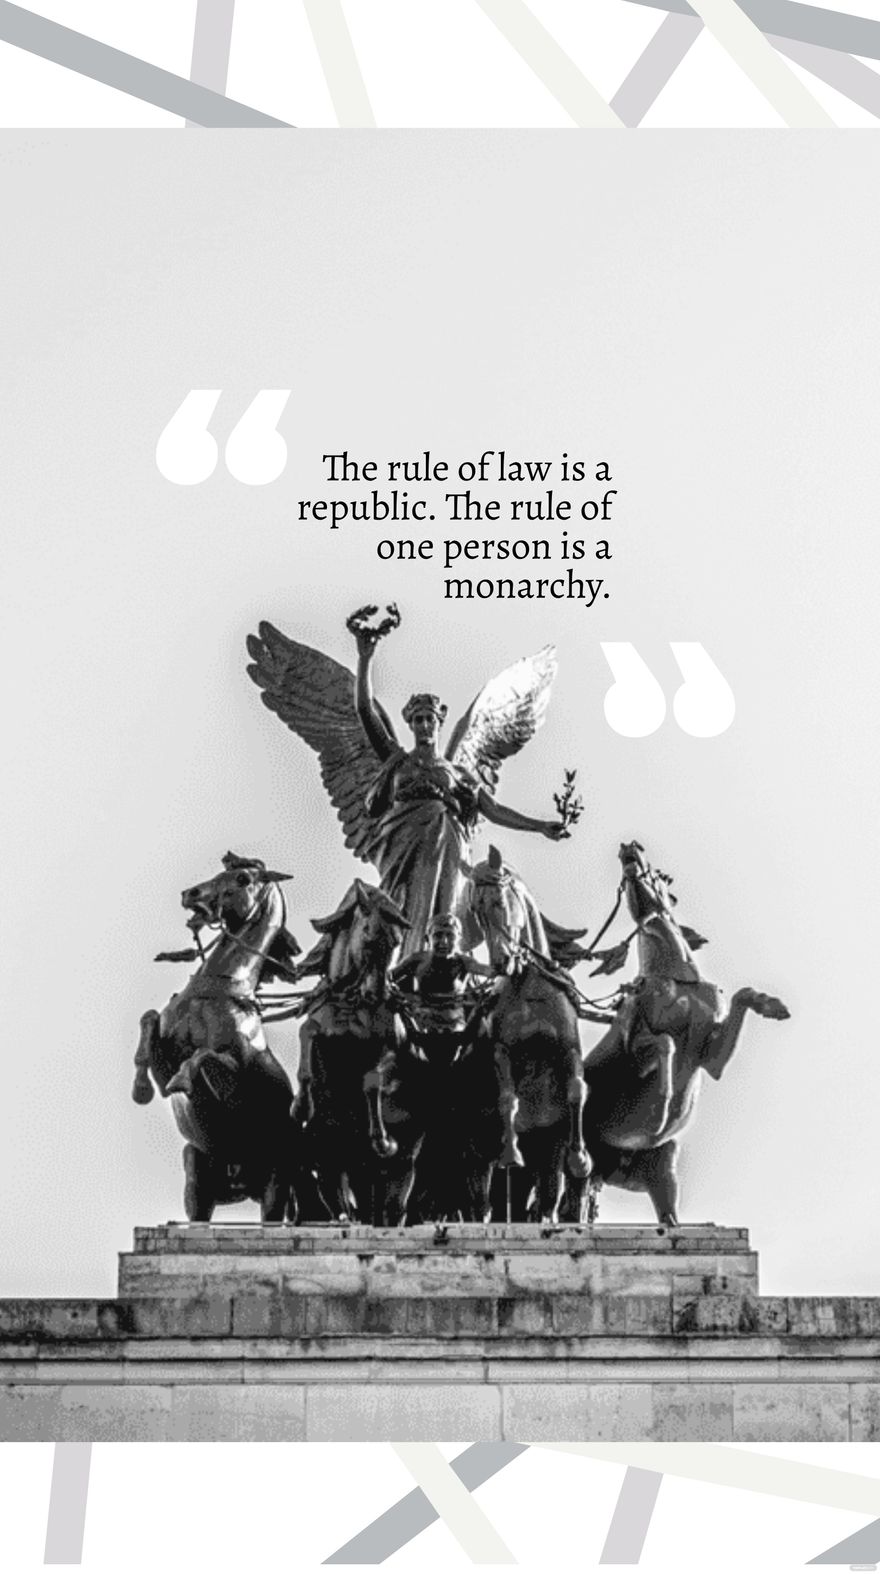 The rule of law is a republic. The rule of one person is a monarchy. - Lee Zeldin